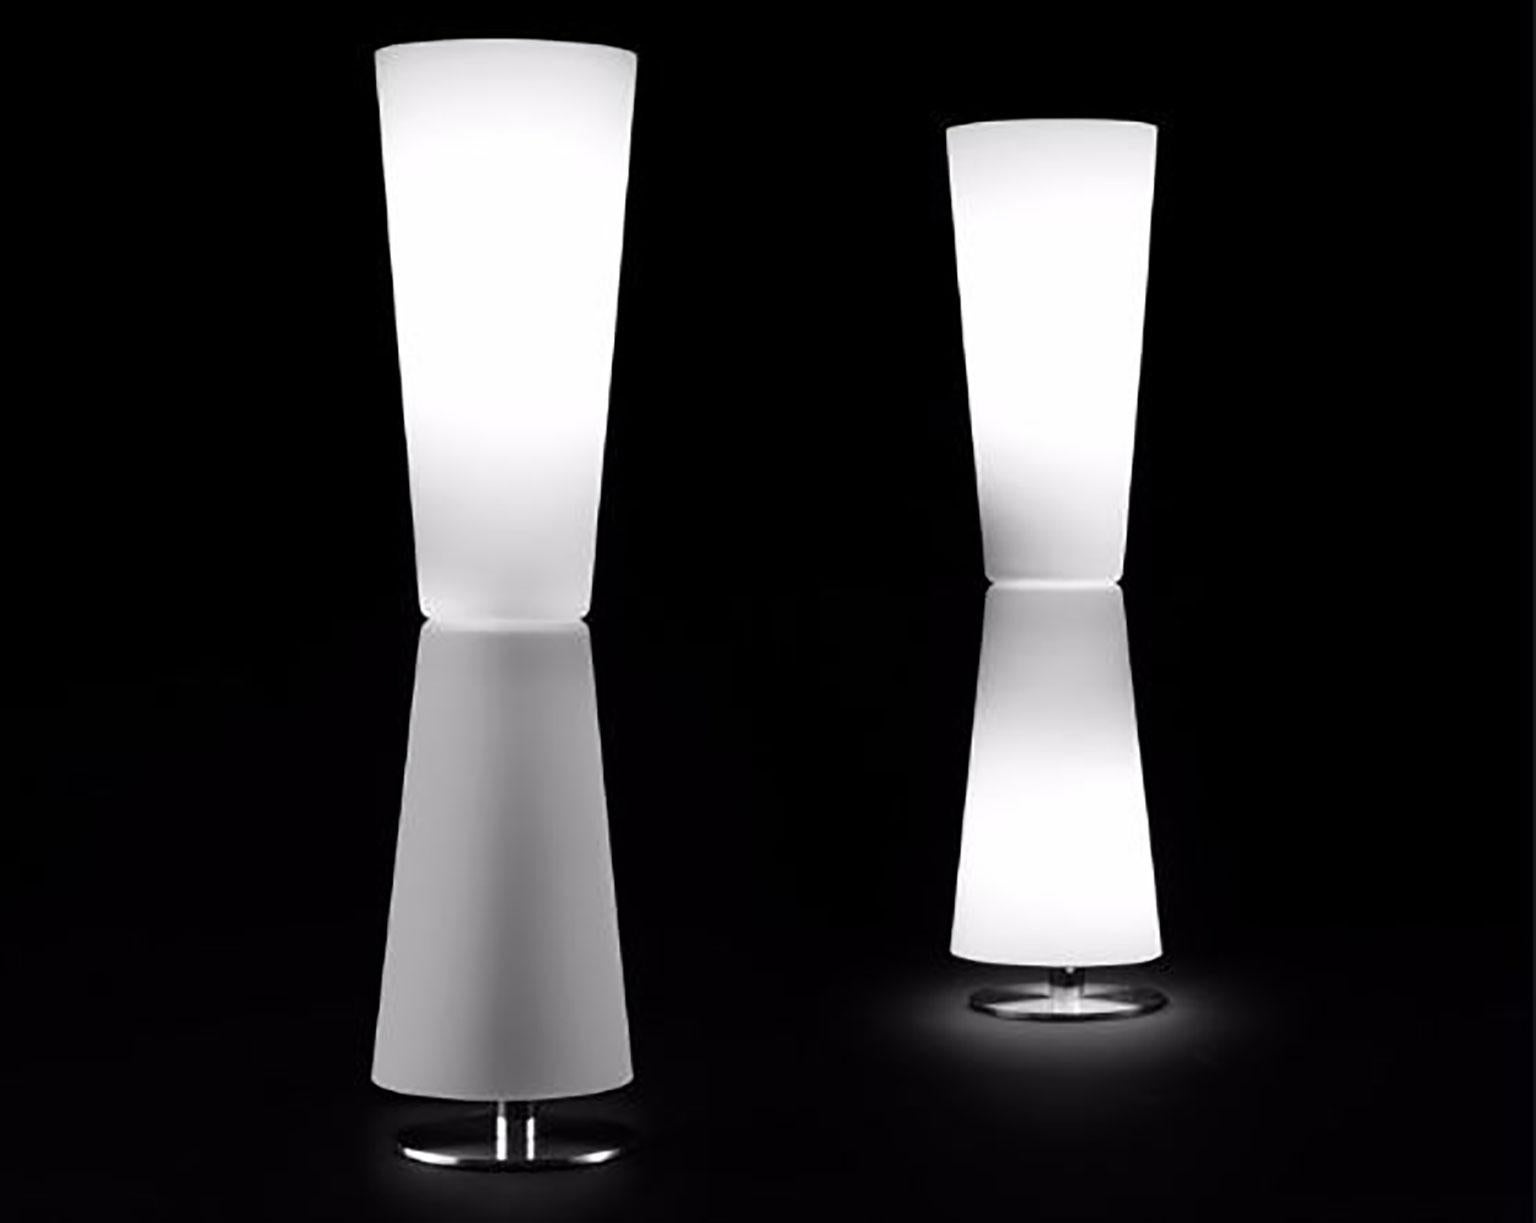 Lu-Lu table lamp designed by Stefano Casciani for Oluce. This lamp provides separately controllable light from both the upper and lower halves of the fixture through a blown Murano glass diffuser with brushed metal for the base. There is a dimmer